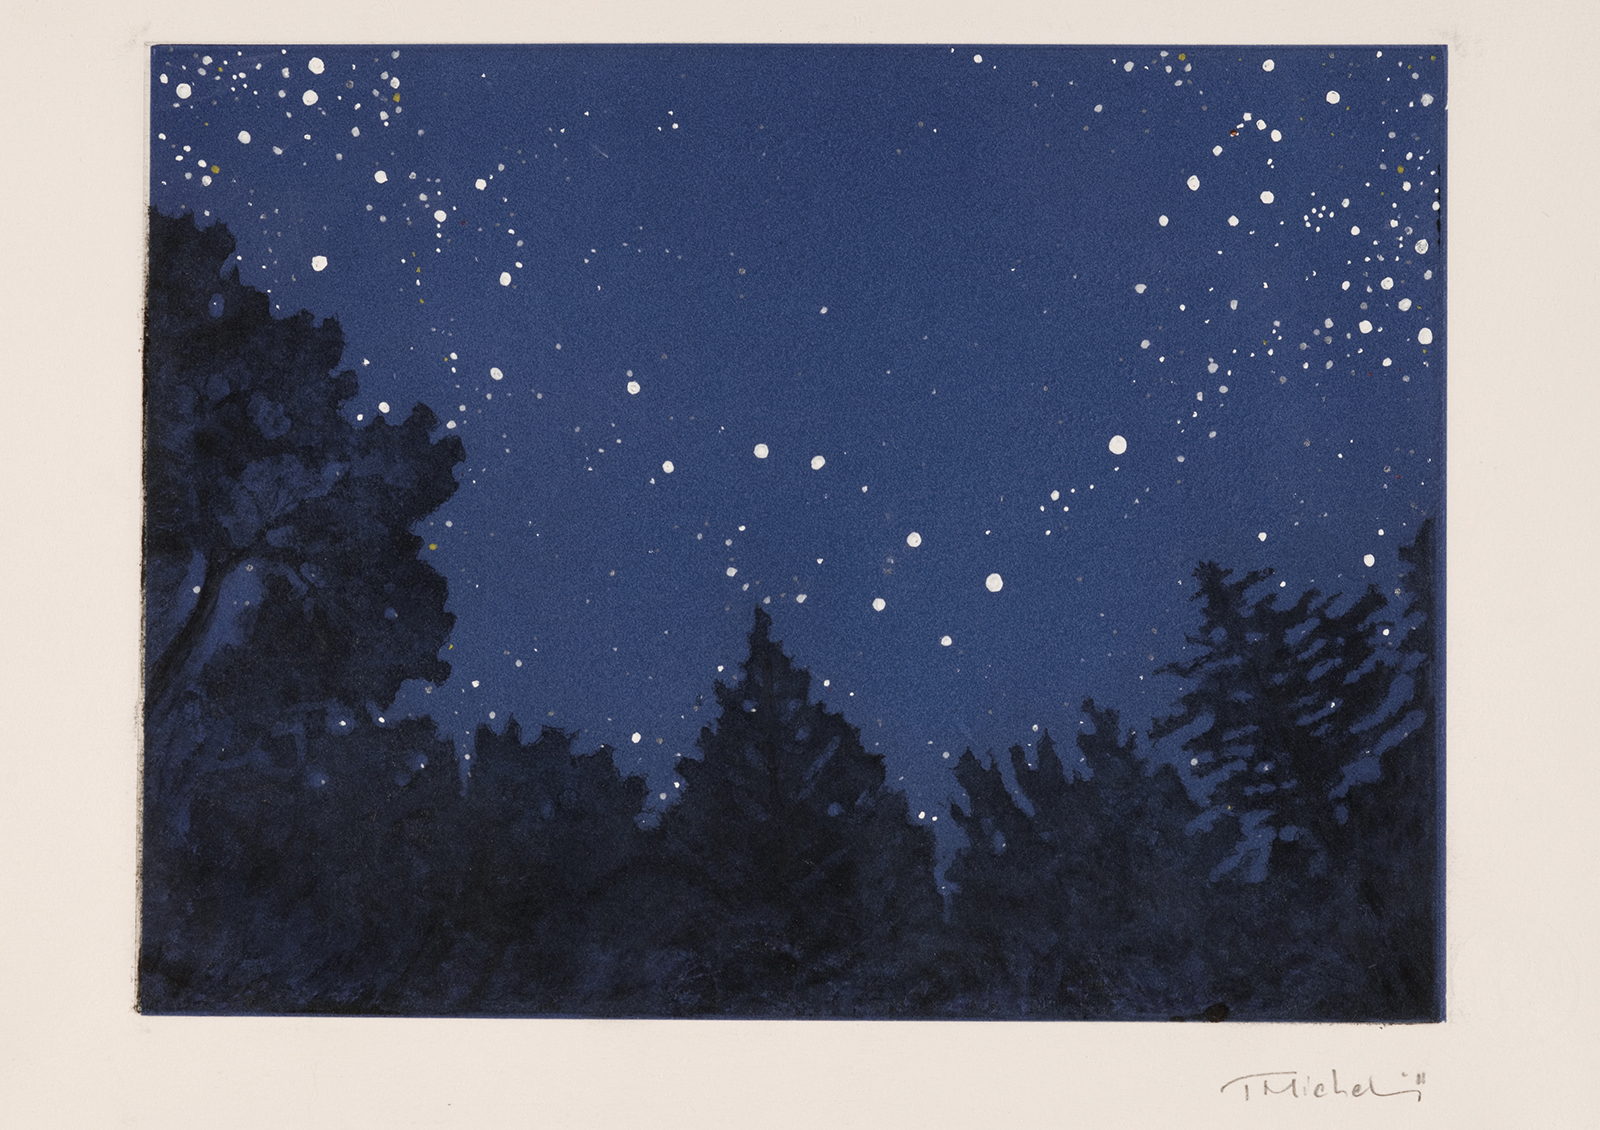 Constellation, Moon and Trees #2